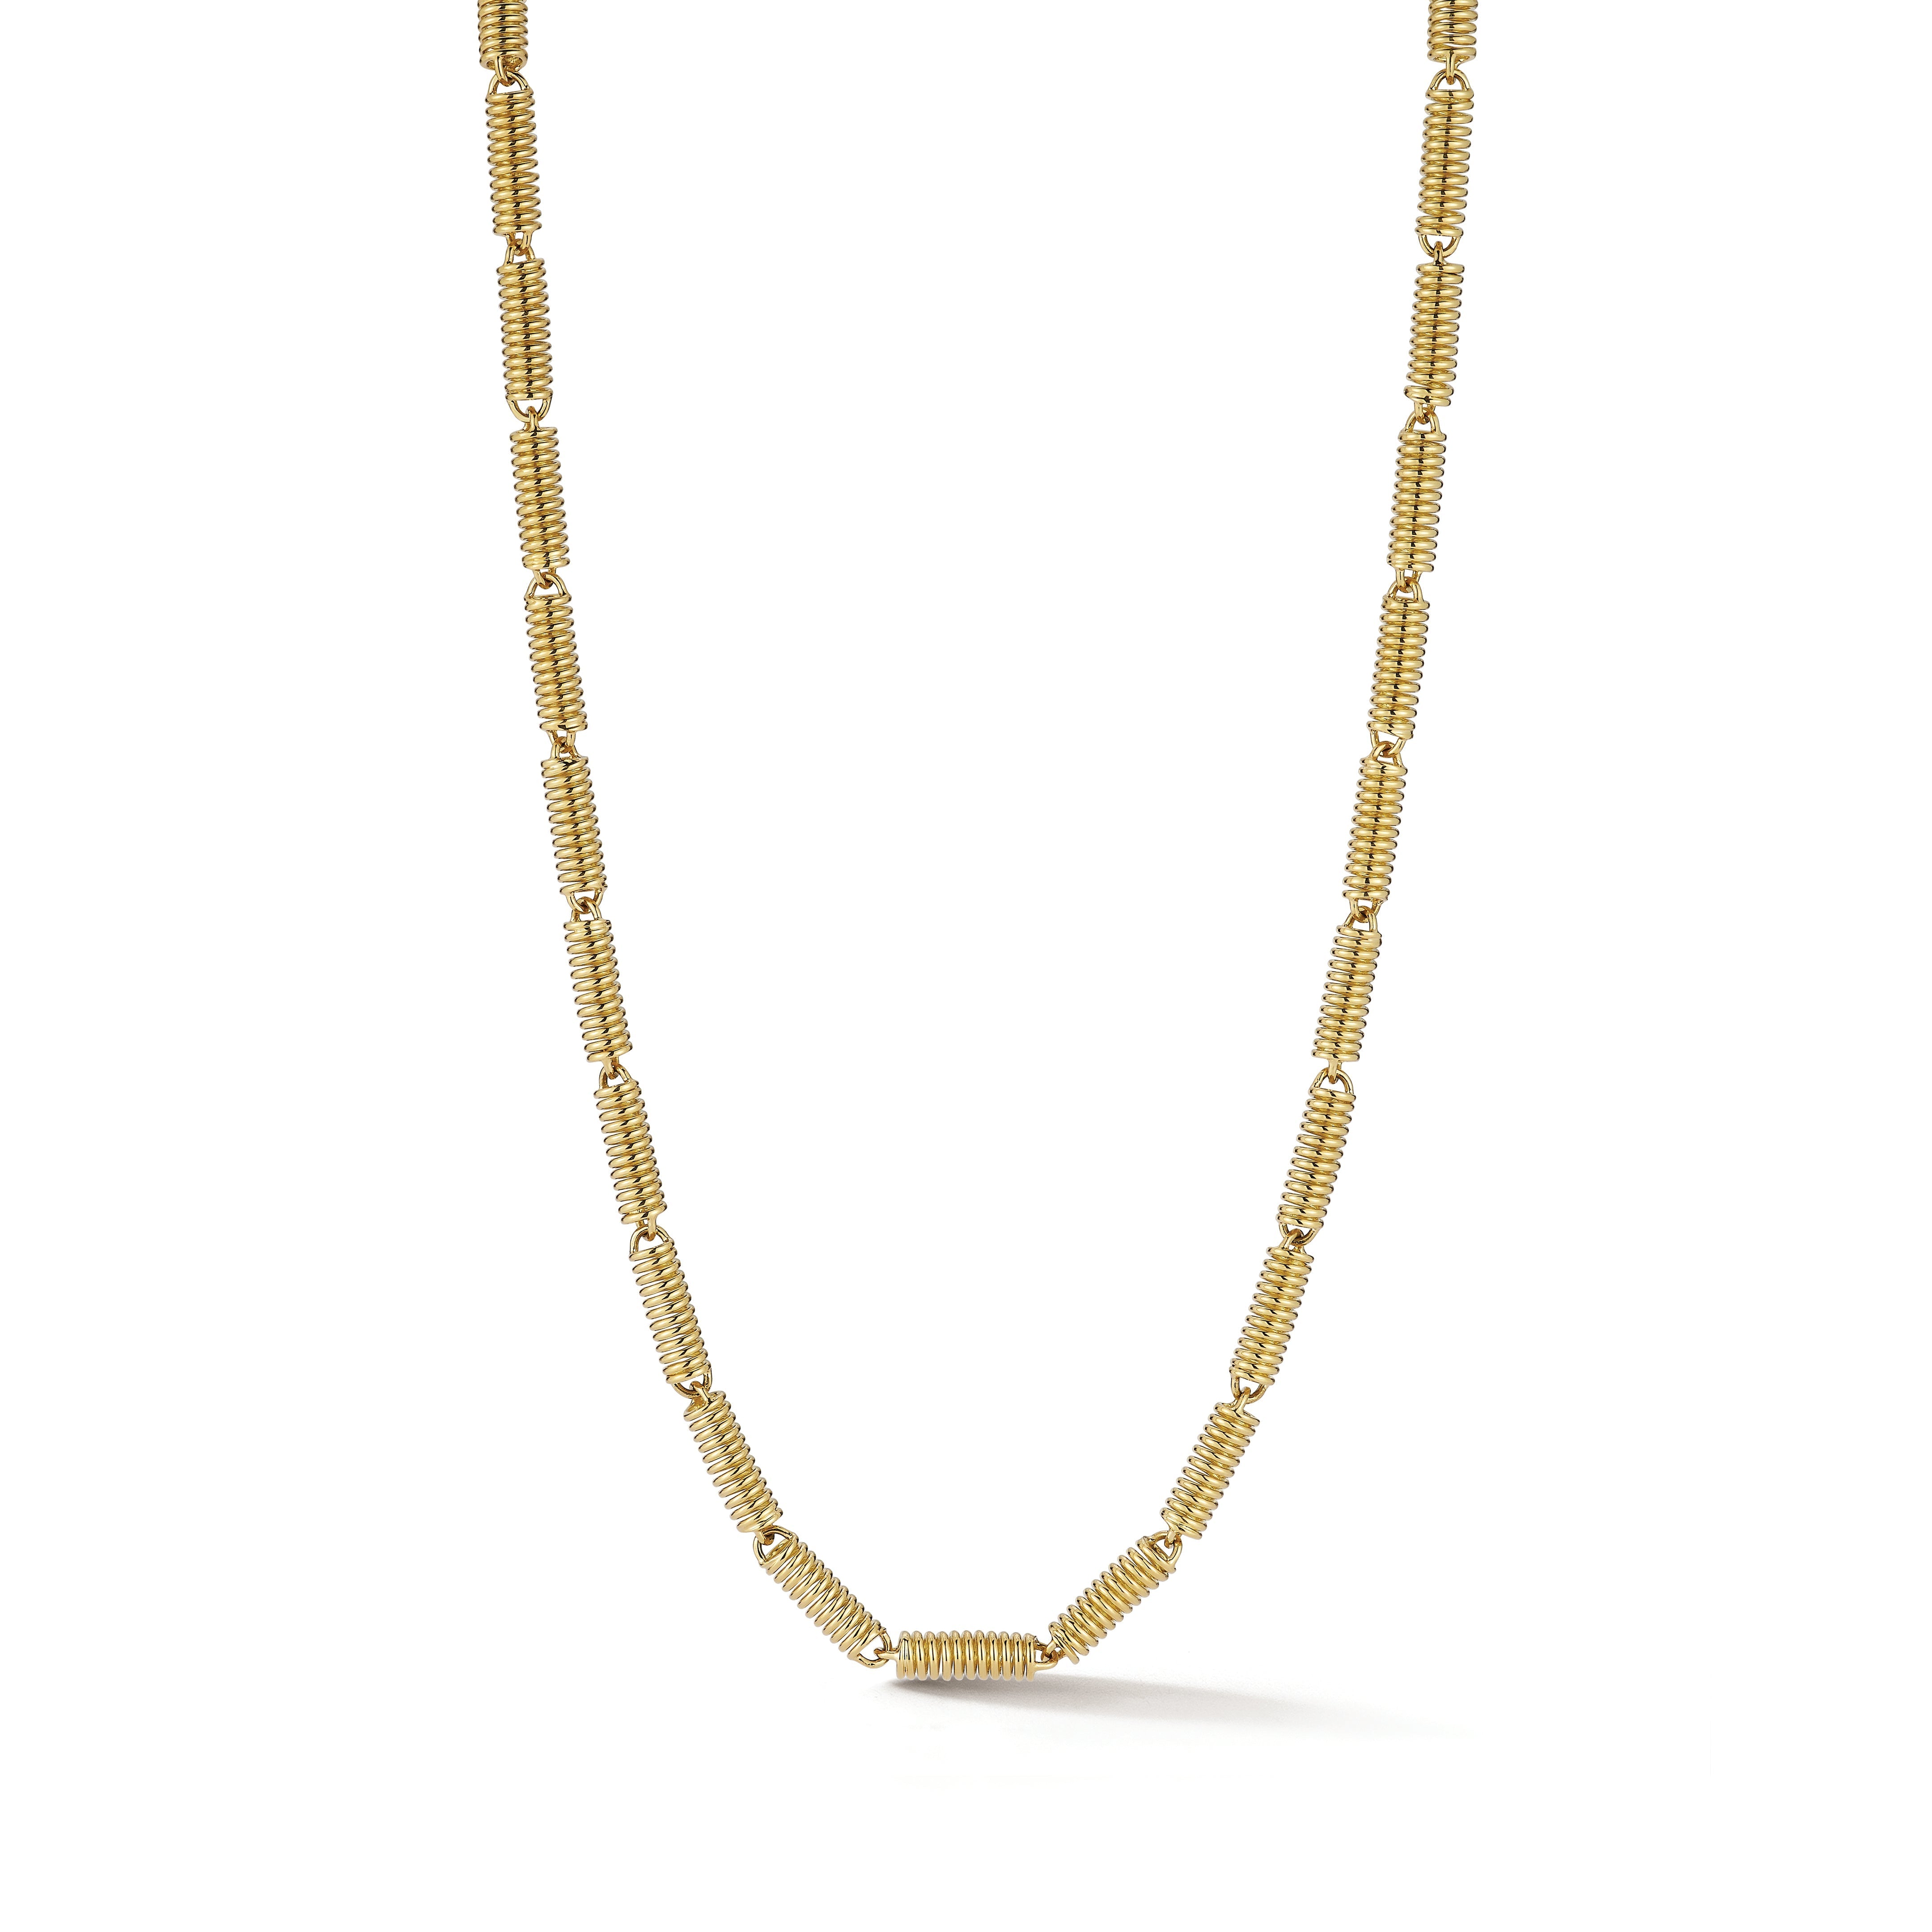 Small Yellow Gold Verona Coil Chain Necklace